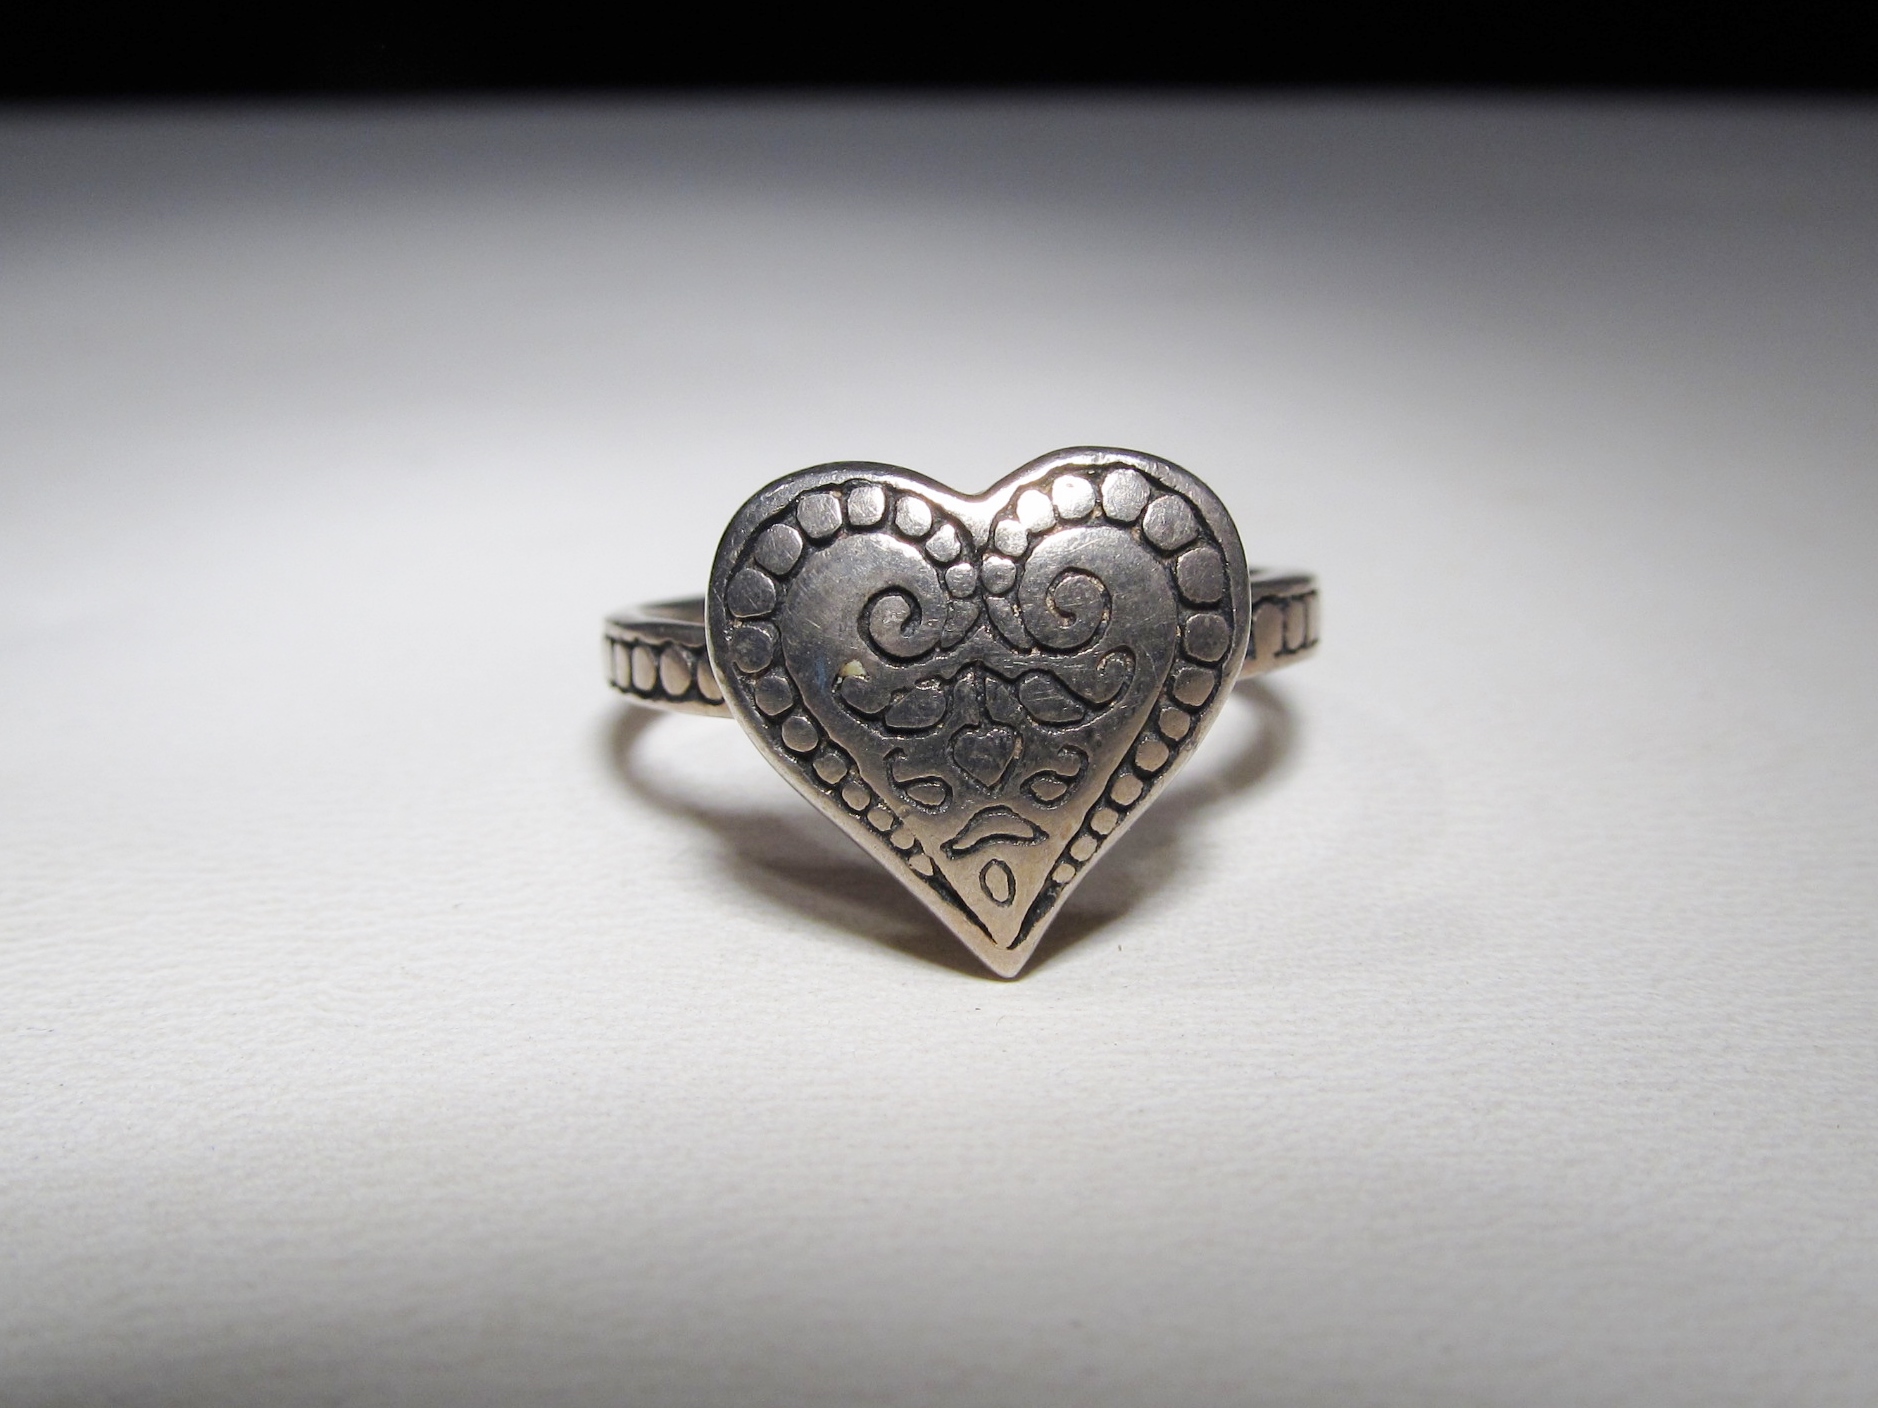 Signed Brighton Sterling Silver Heart Ring Size 8 WC307 49.99